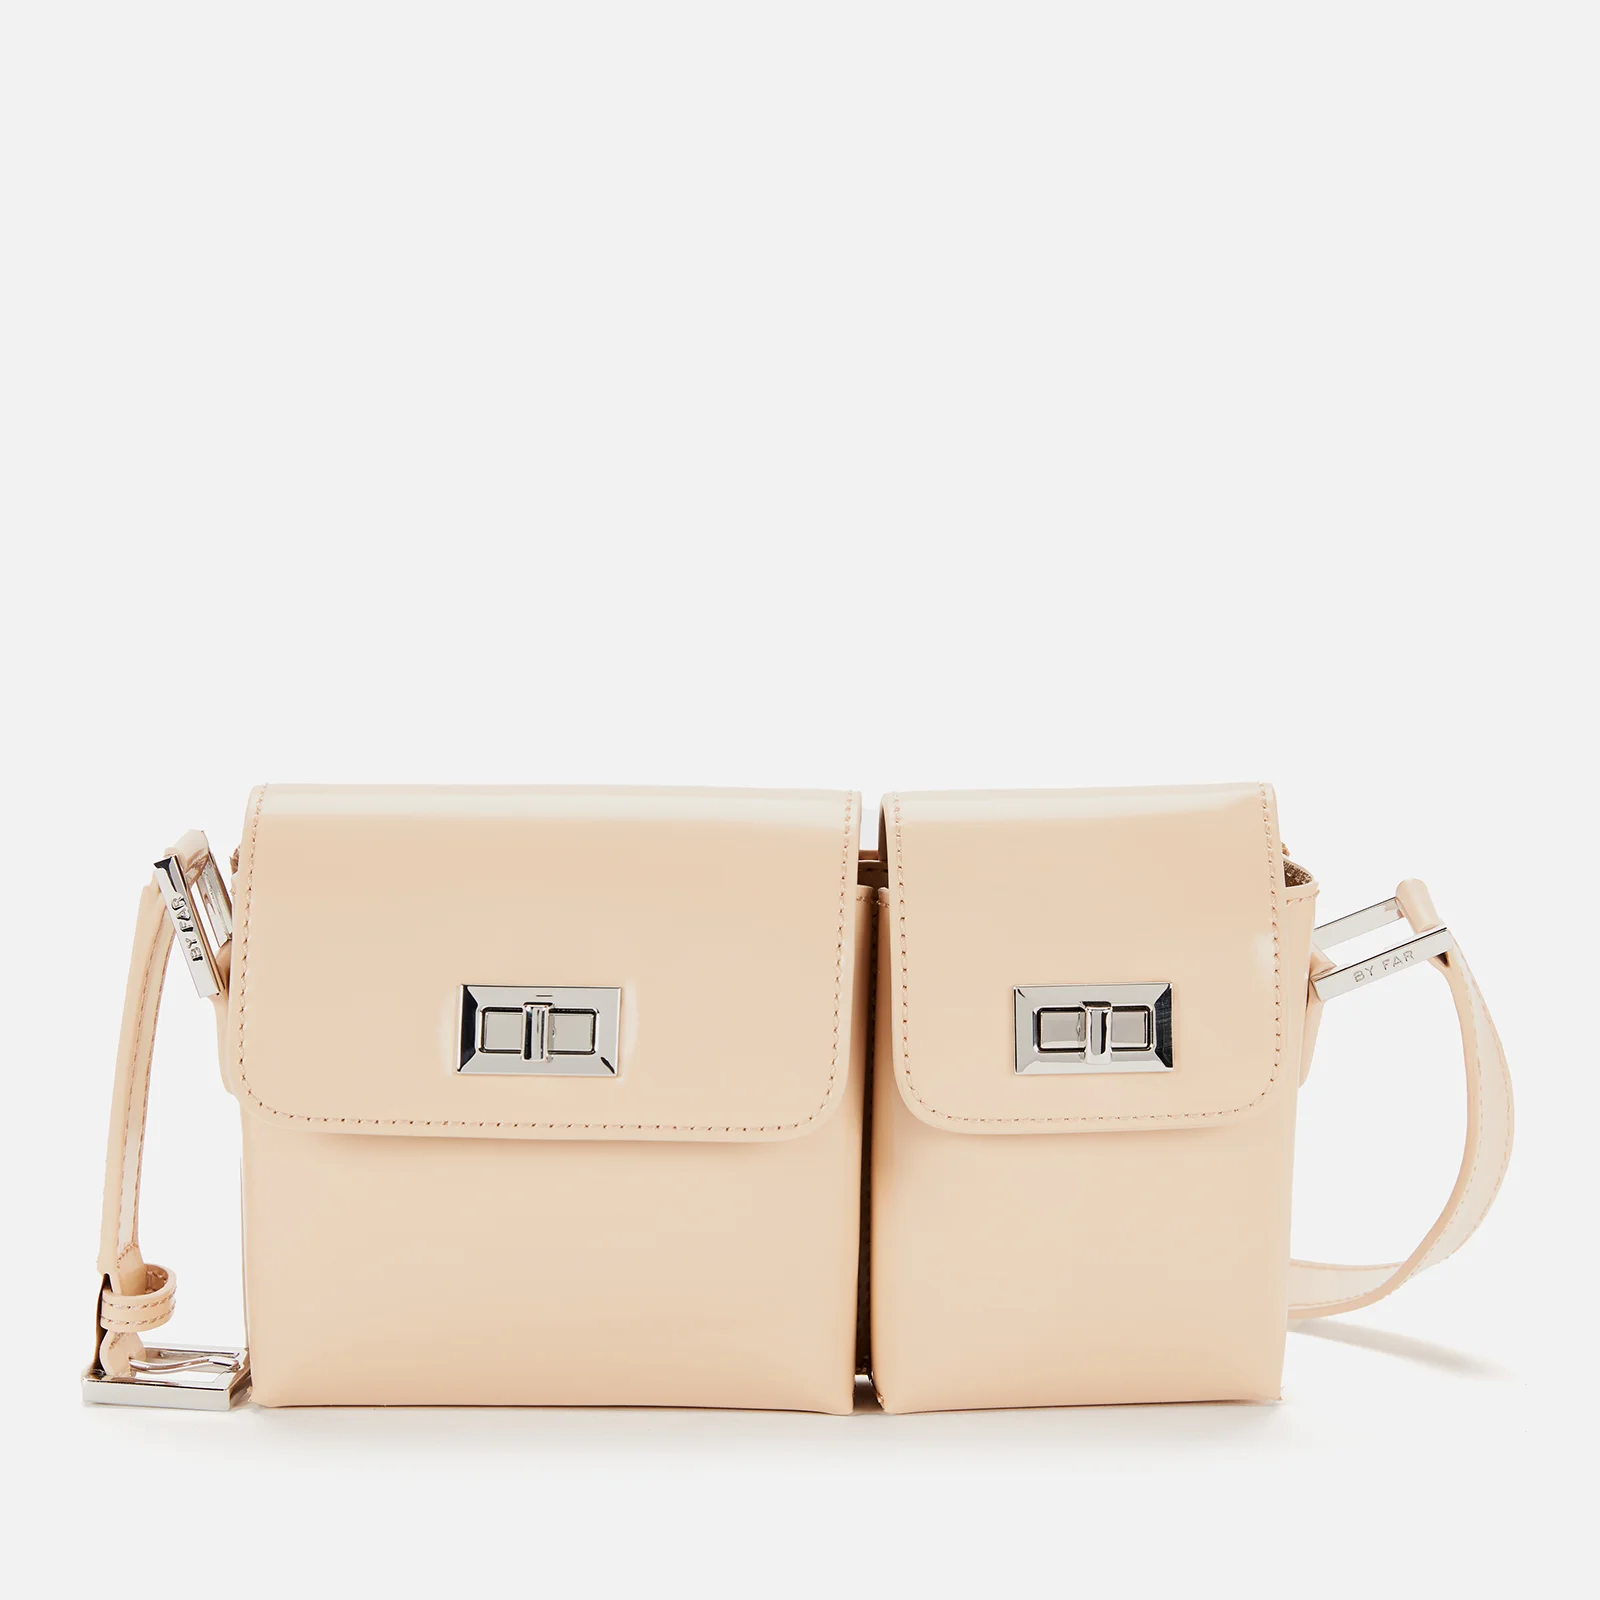 BY FAR Women's Baby Billy Semi Patent Bag - Sand Image 1